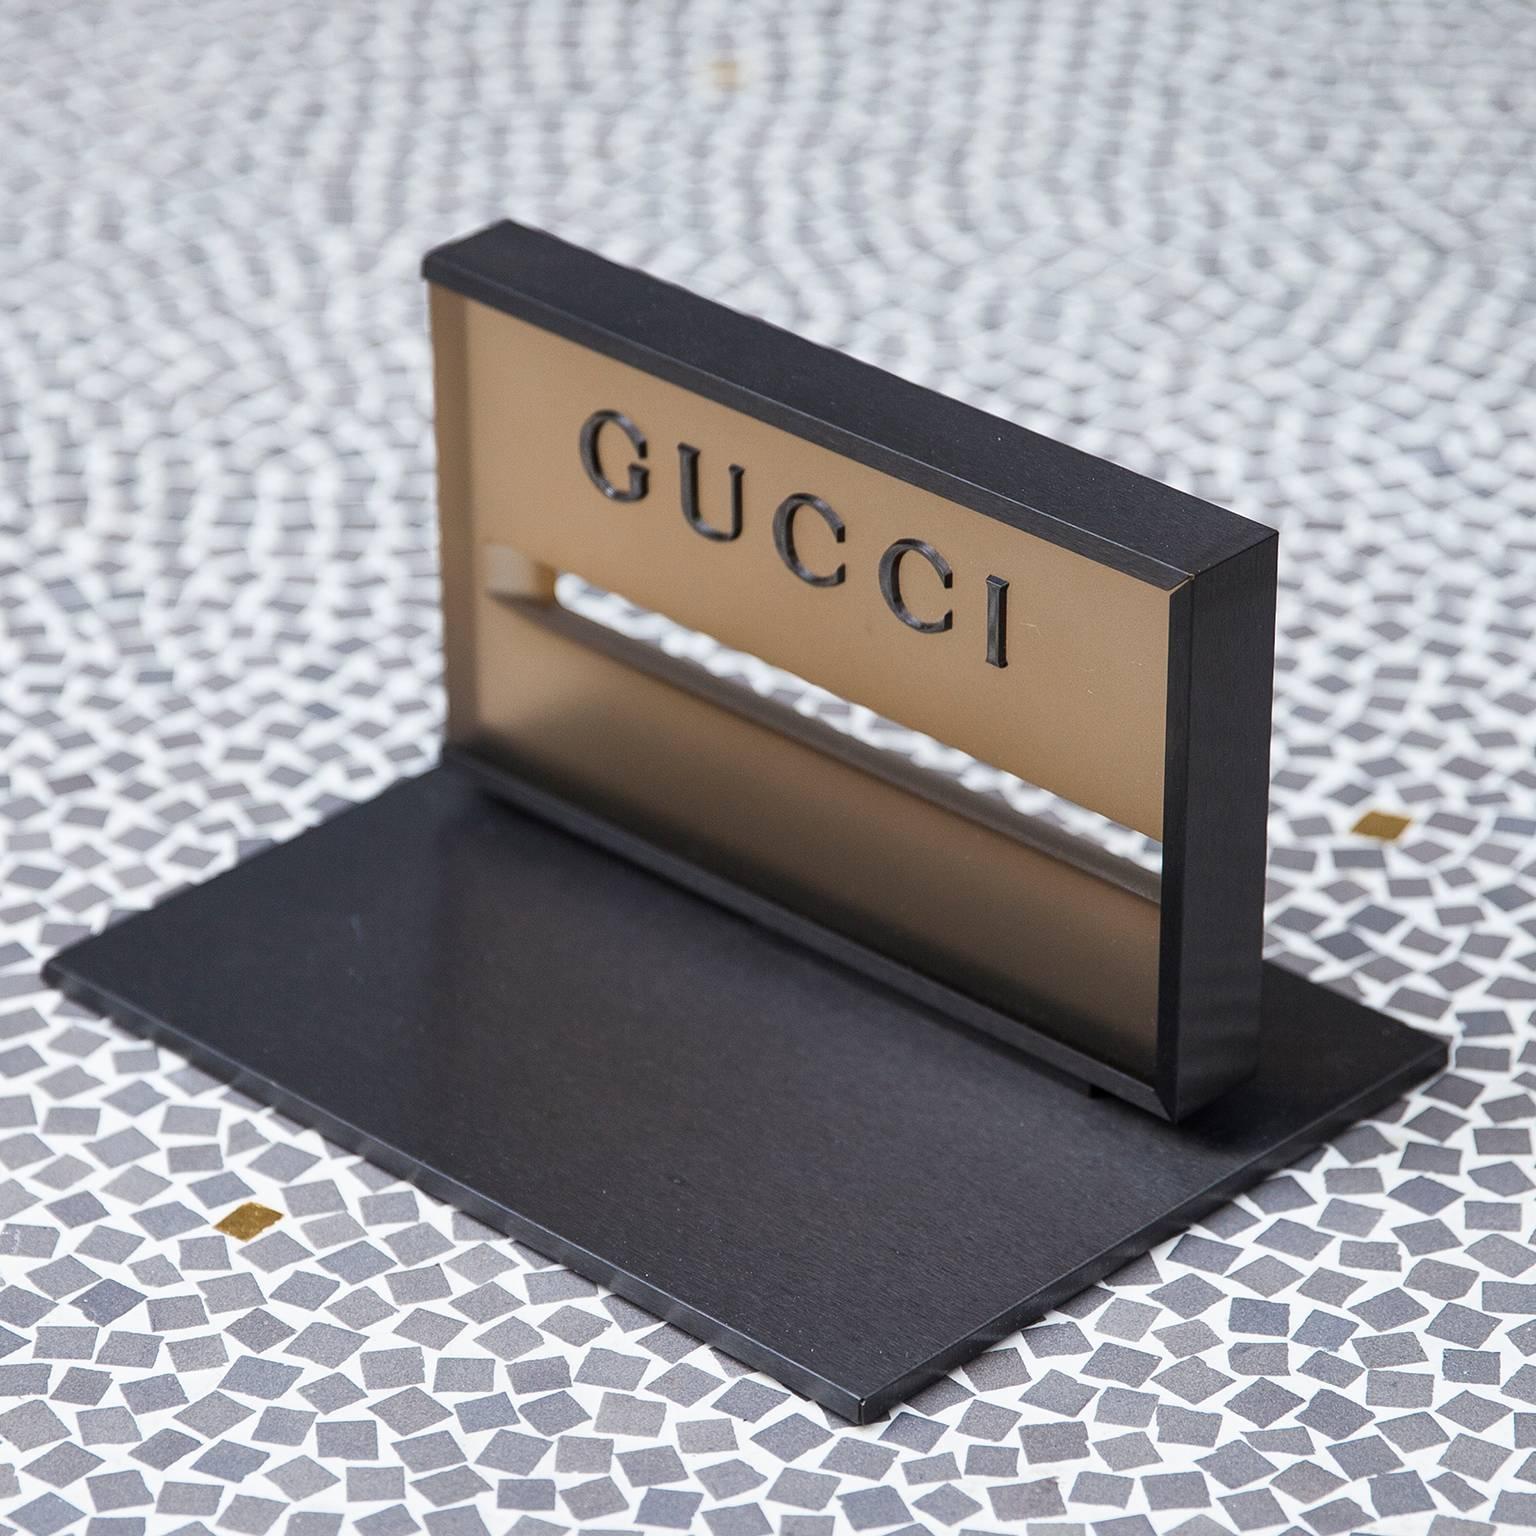 Gucci desk paperweight from the 1980s, this elegant piece is based on an anthrazite metal base and an acrylic stand, attributed to Tom Ford.